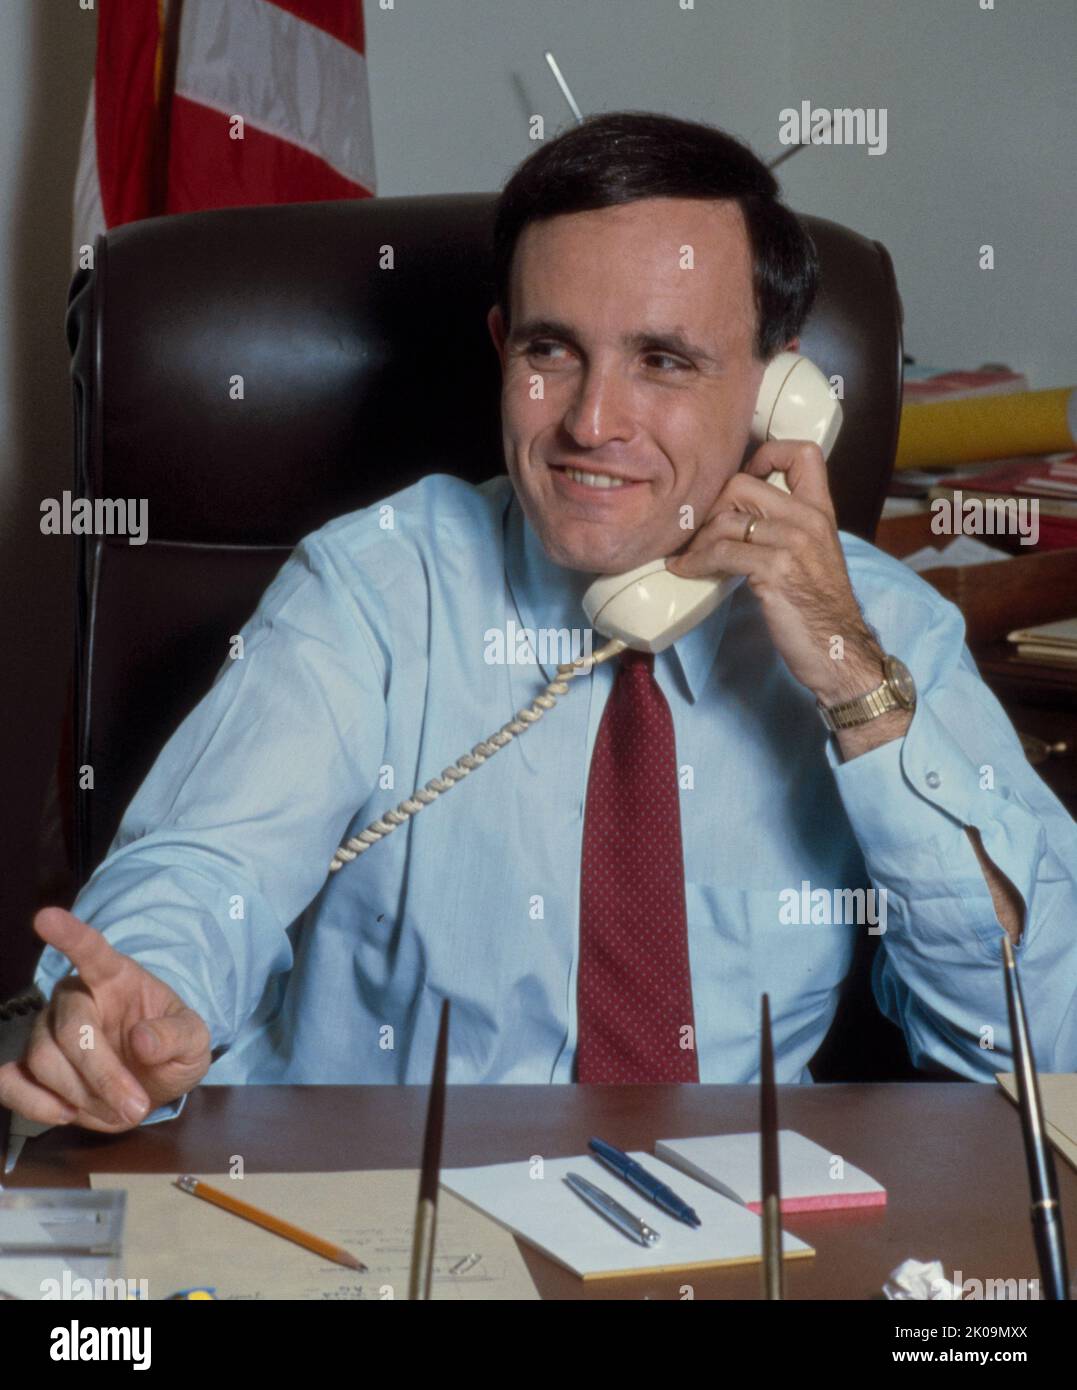 Rudolph Giuliani (born 1944) American politician and attorney who served as the 107th Mayor of New York City from 1994 to 2001. He previously served as the United States Associate Attorney General from 1981 to 1983 and the United States Attorney for the Southern District of New York from 1983 to 1989. Stock Photo